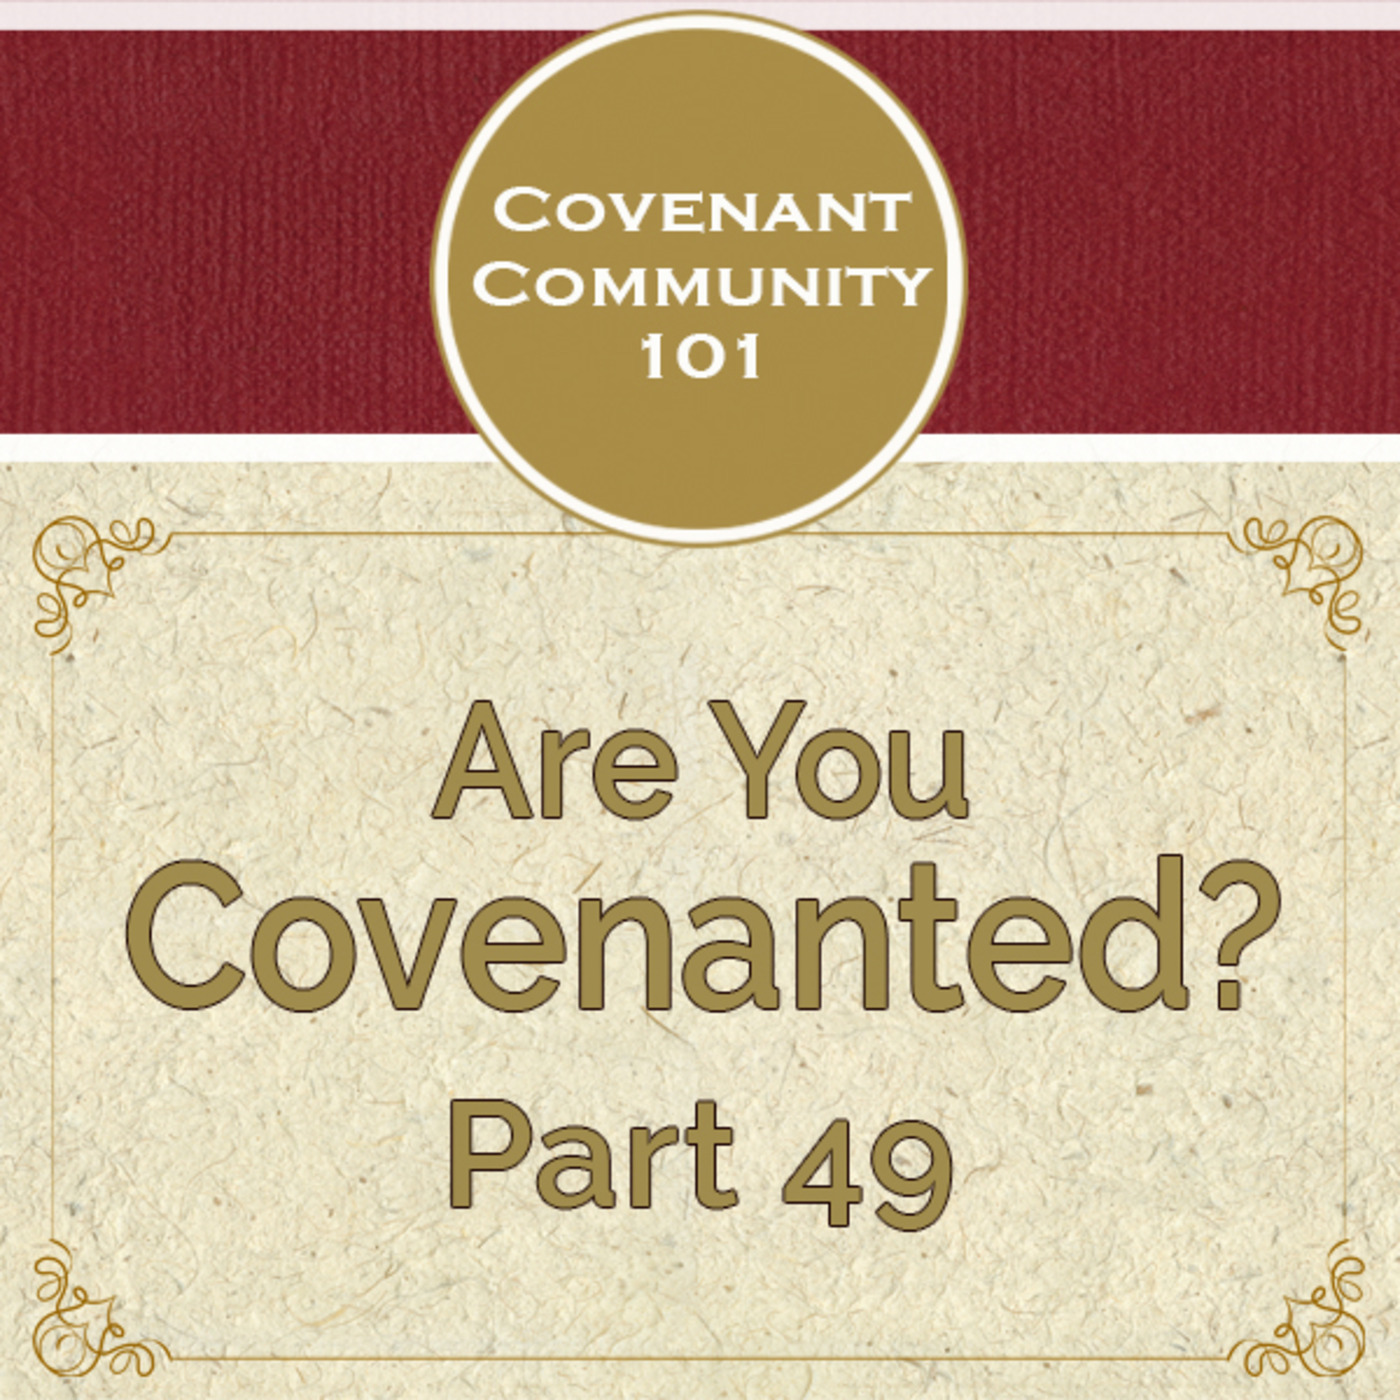 Covenant Community 101: Are You Covenanted? Part 49